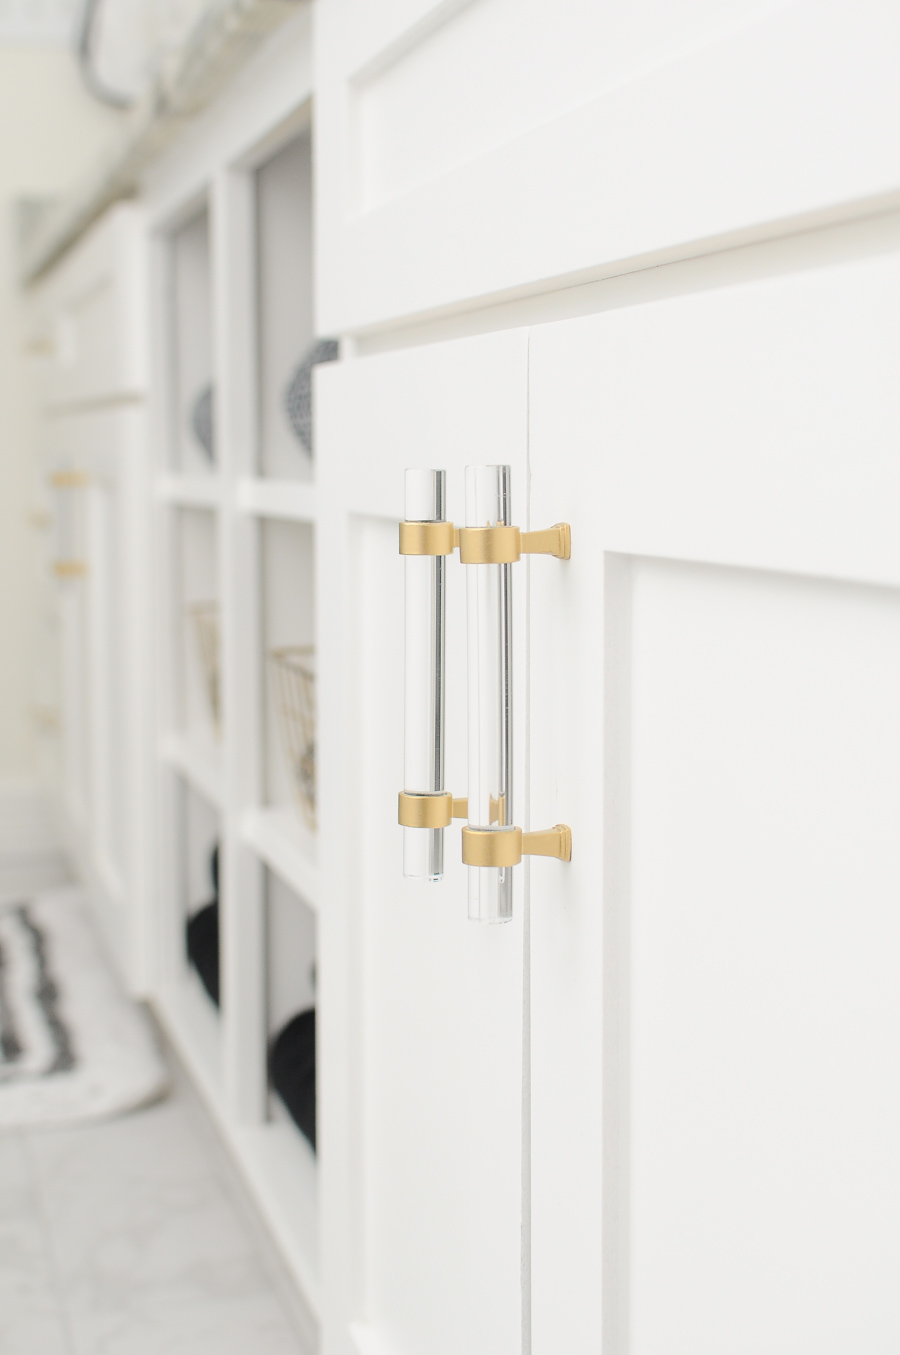 DIY tutorial on how to turn chrome and lucite cabinet pulls and hardware into a brushed satin gold finish. Perfect for bathrooms and kitchens.